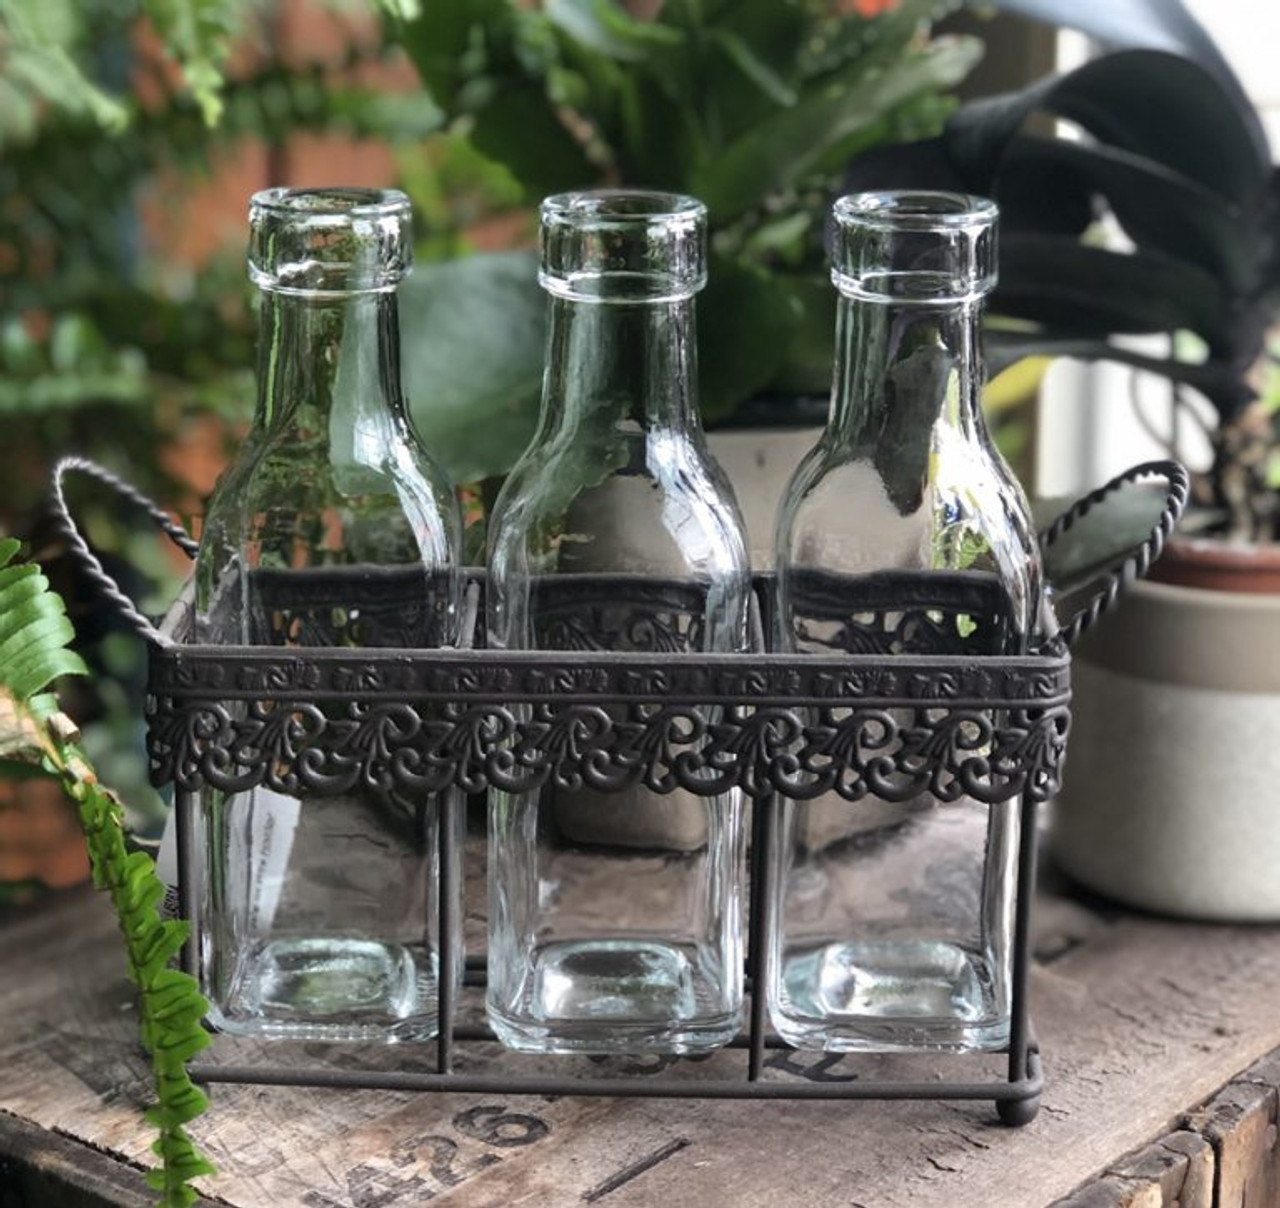 Small Milk Bottles And Metal Holder